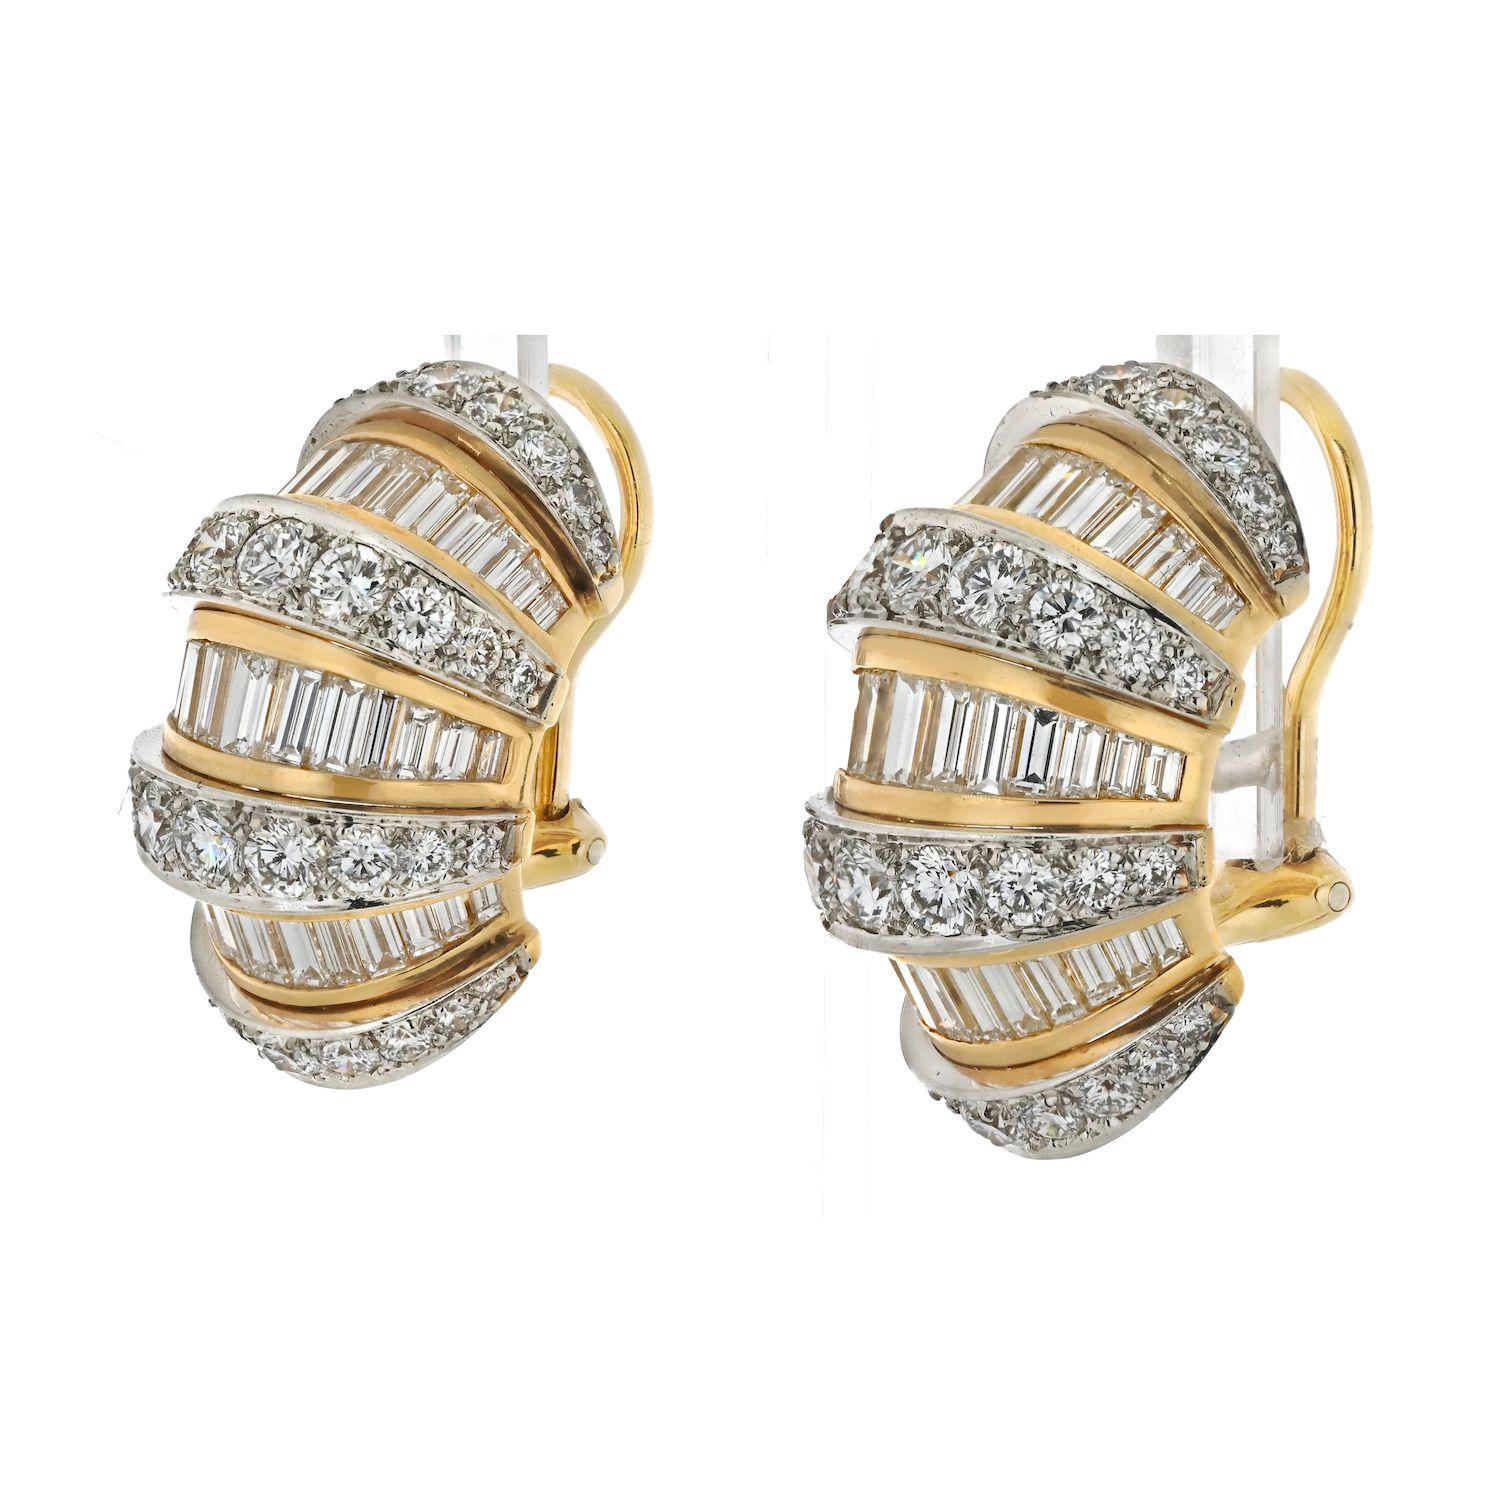 Indulge in the unparalleled allure of the Oscar Heyman Platinum & 18K Yellow Gold Dome Shrimp Earrings, a true masterpiece that embodies the pinnacle of fine jewelry craftsmanship. Elegantly adorned with a mesmerizing combination of baguette and